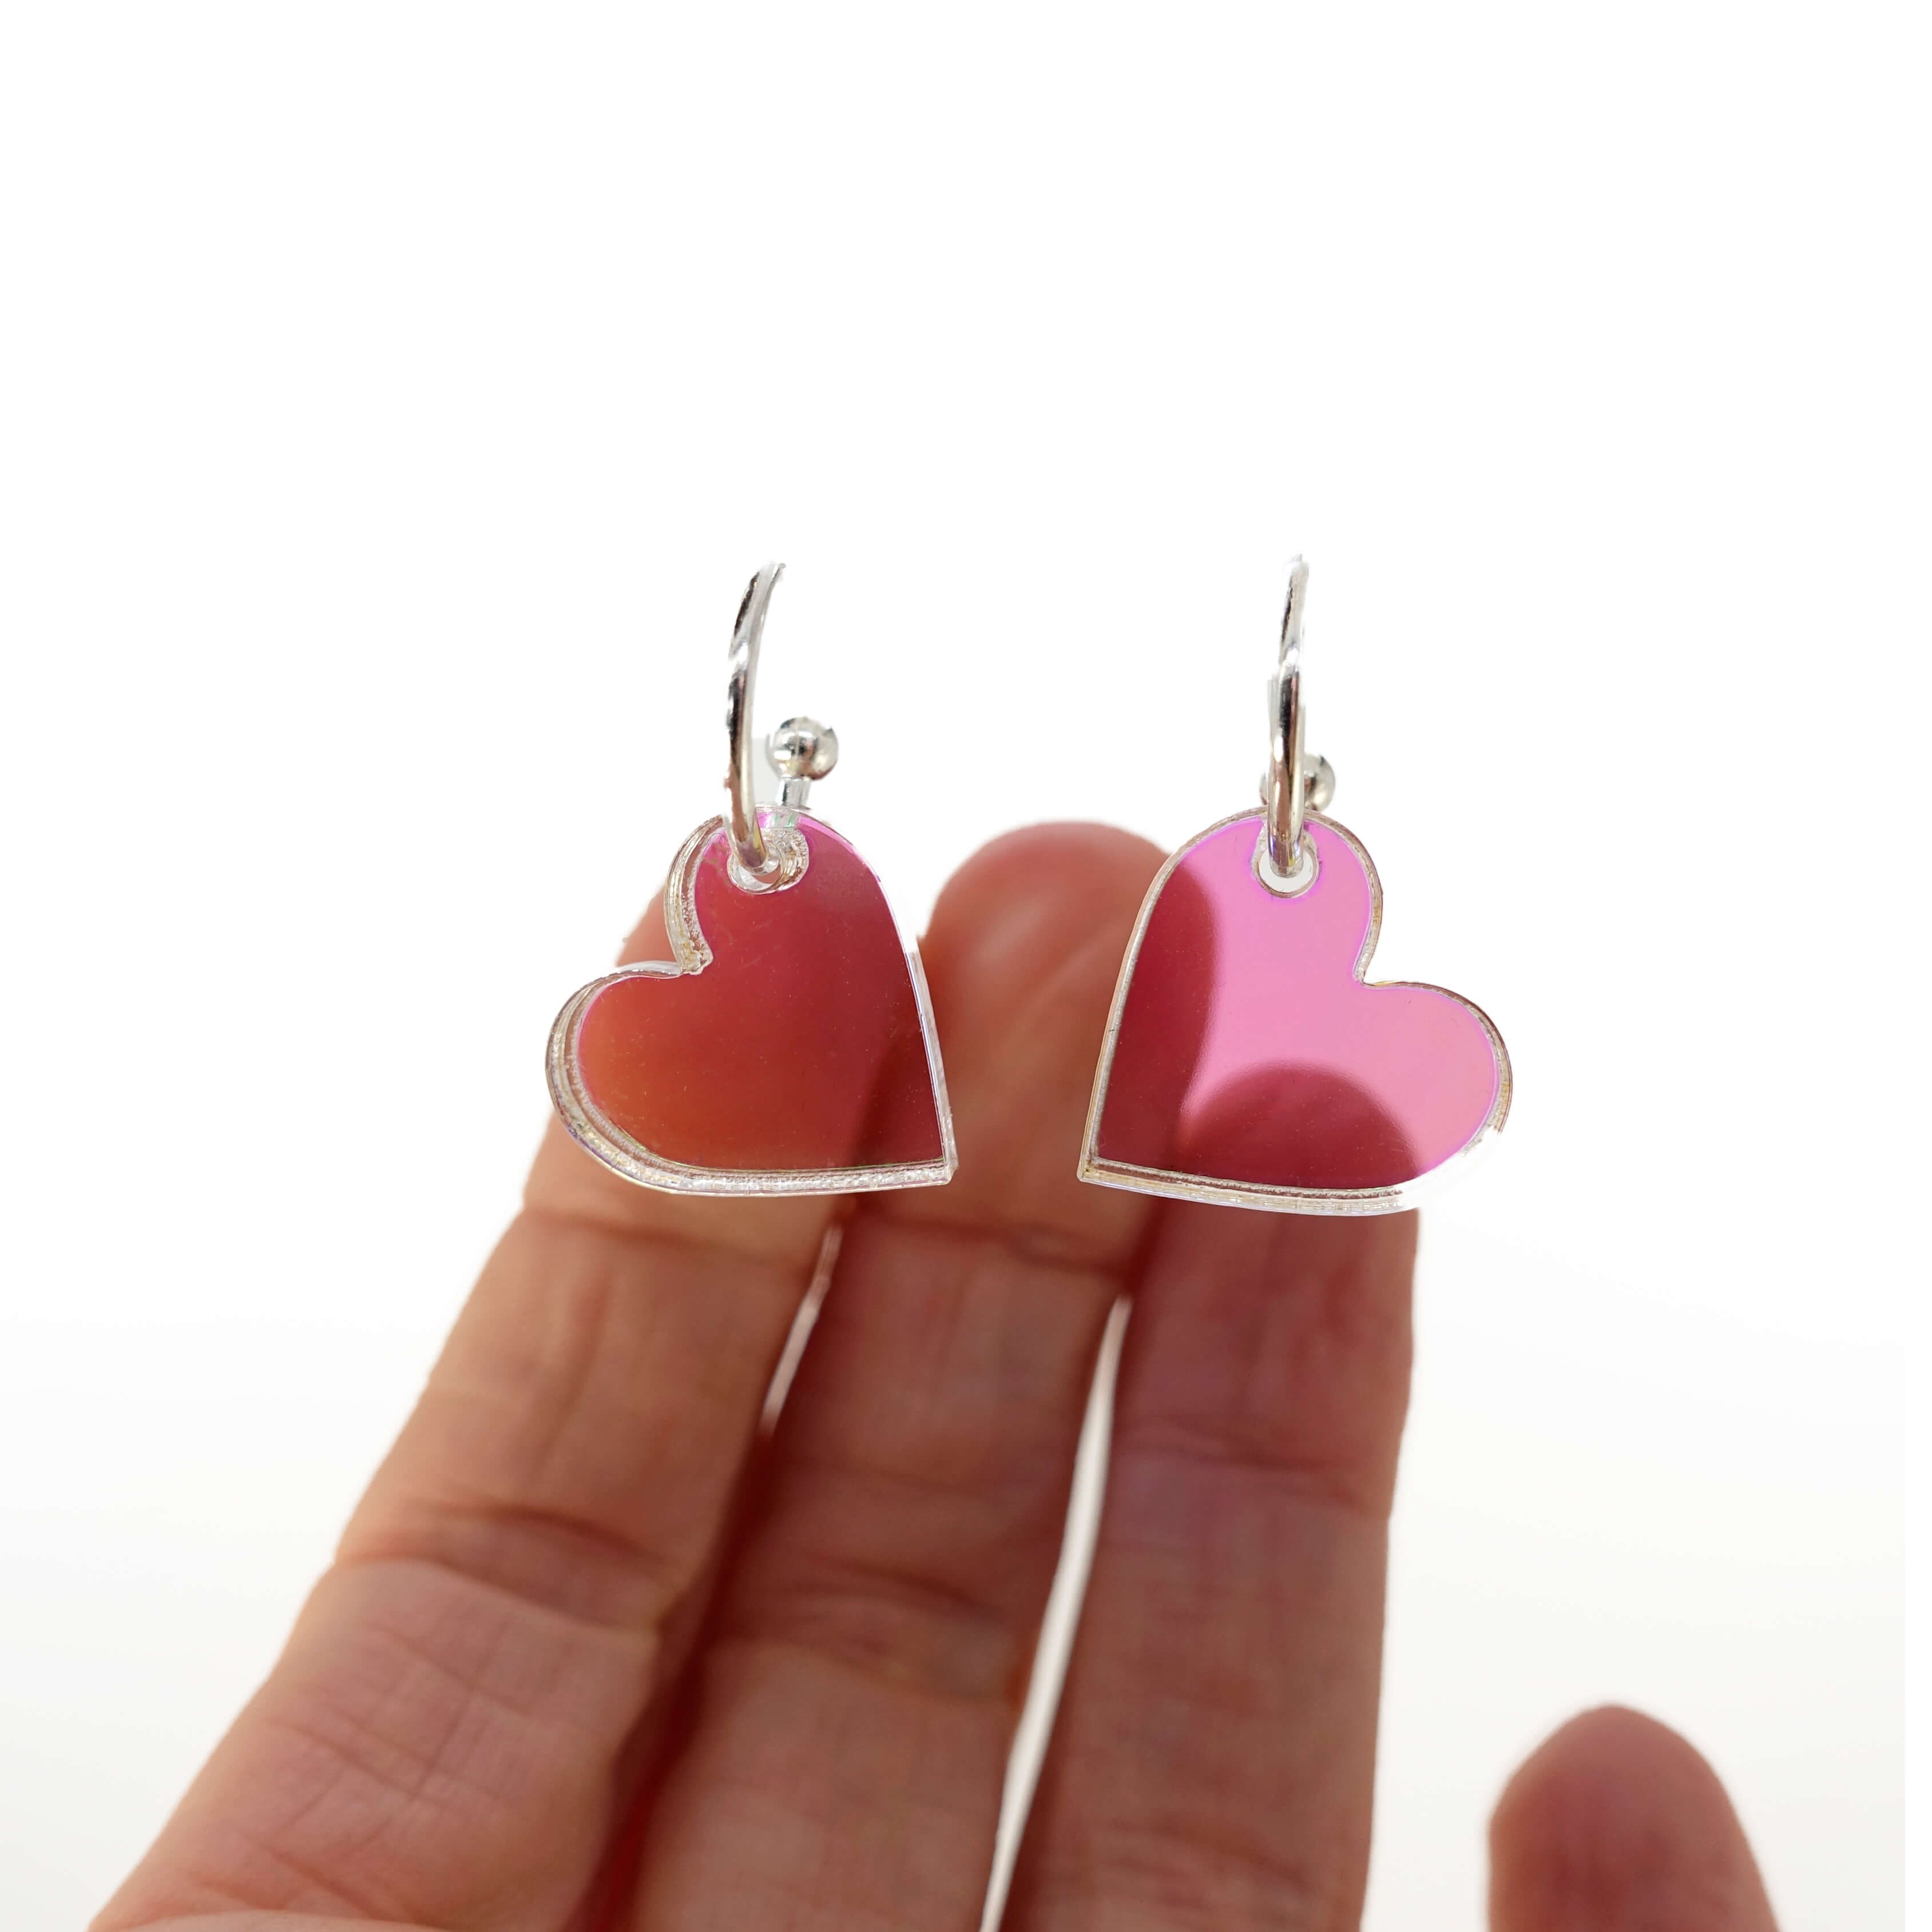 Iridescent simple heart hoop earrings hanging with a hand behind to show their transparence/iridescence. 